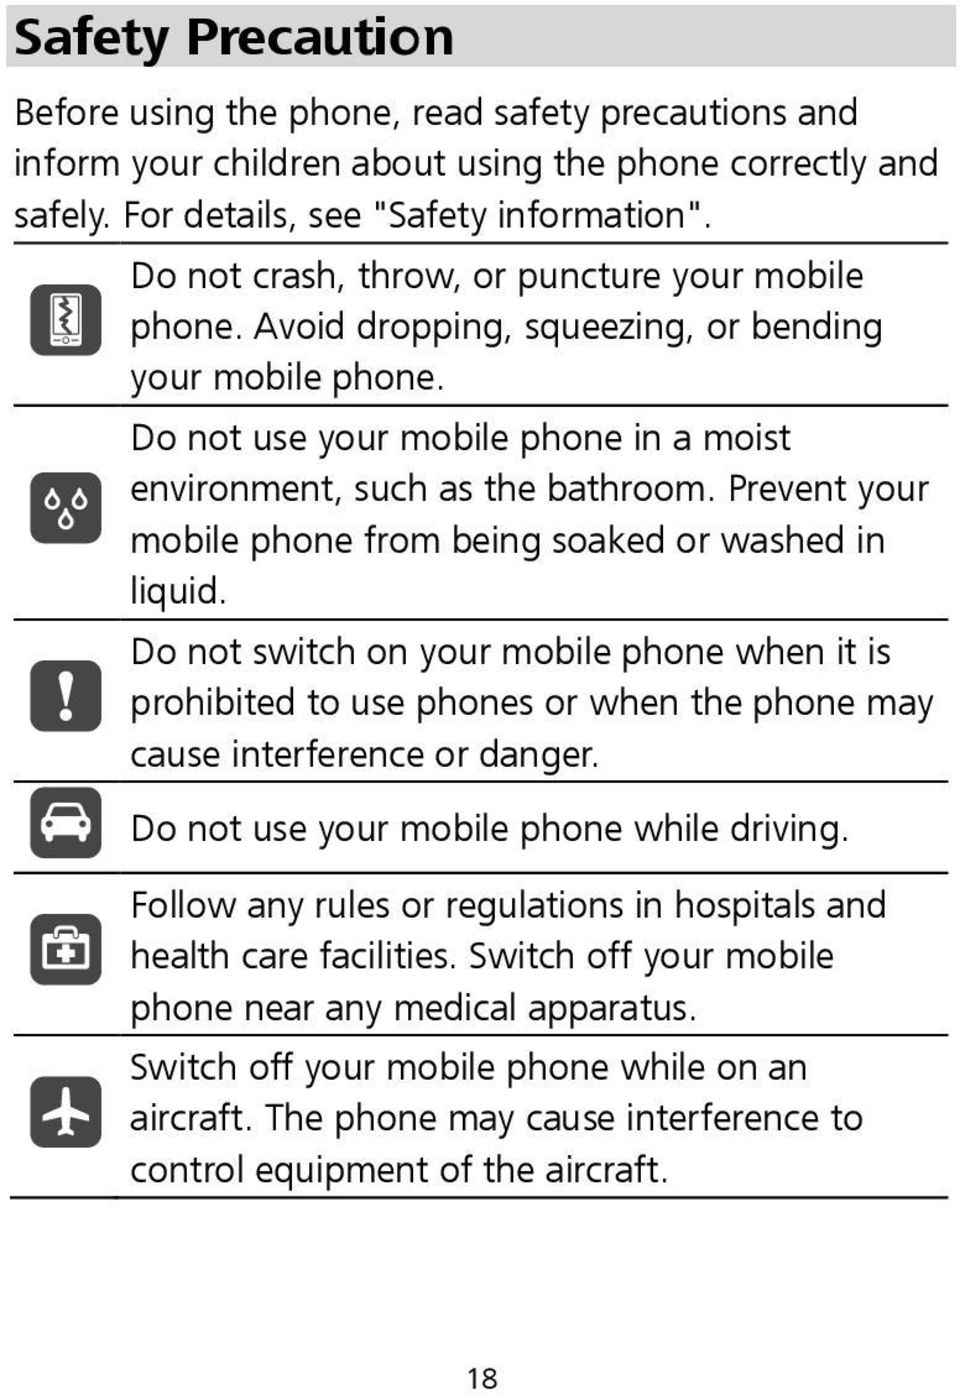 Prevent your mobile phone from being soaked or washed in liquid. Do not switch on your mobile phone when it is prohibited to use phones or when the phone may cause interference or danger.